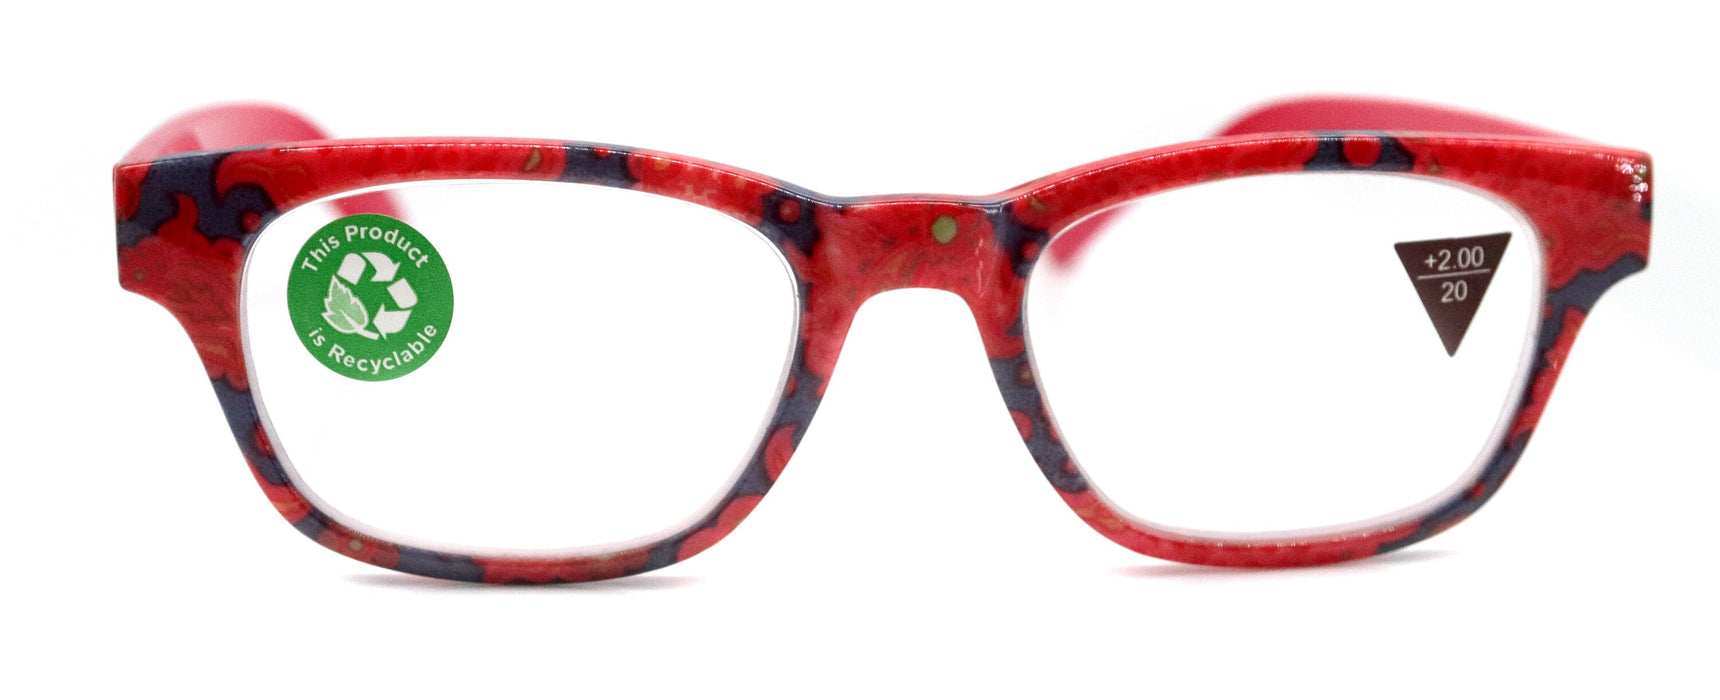 Persia, (Premium) Reading Glasses High End Reader, Magnifying Eyeglass, Square Optical Frame (Red, Blue n Orange) Paisley NY Fifth Avenue